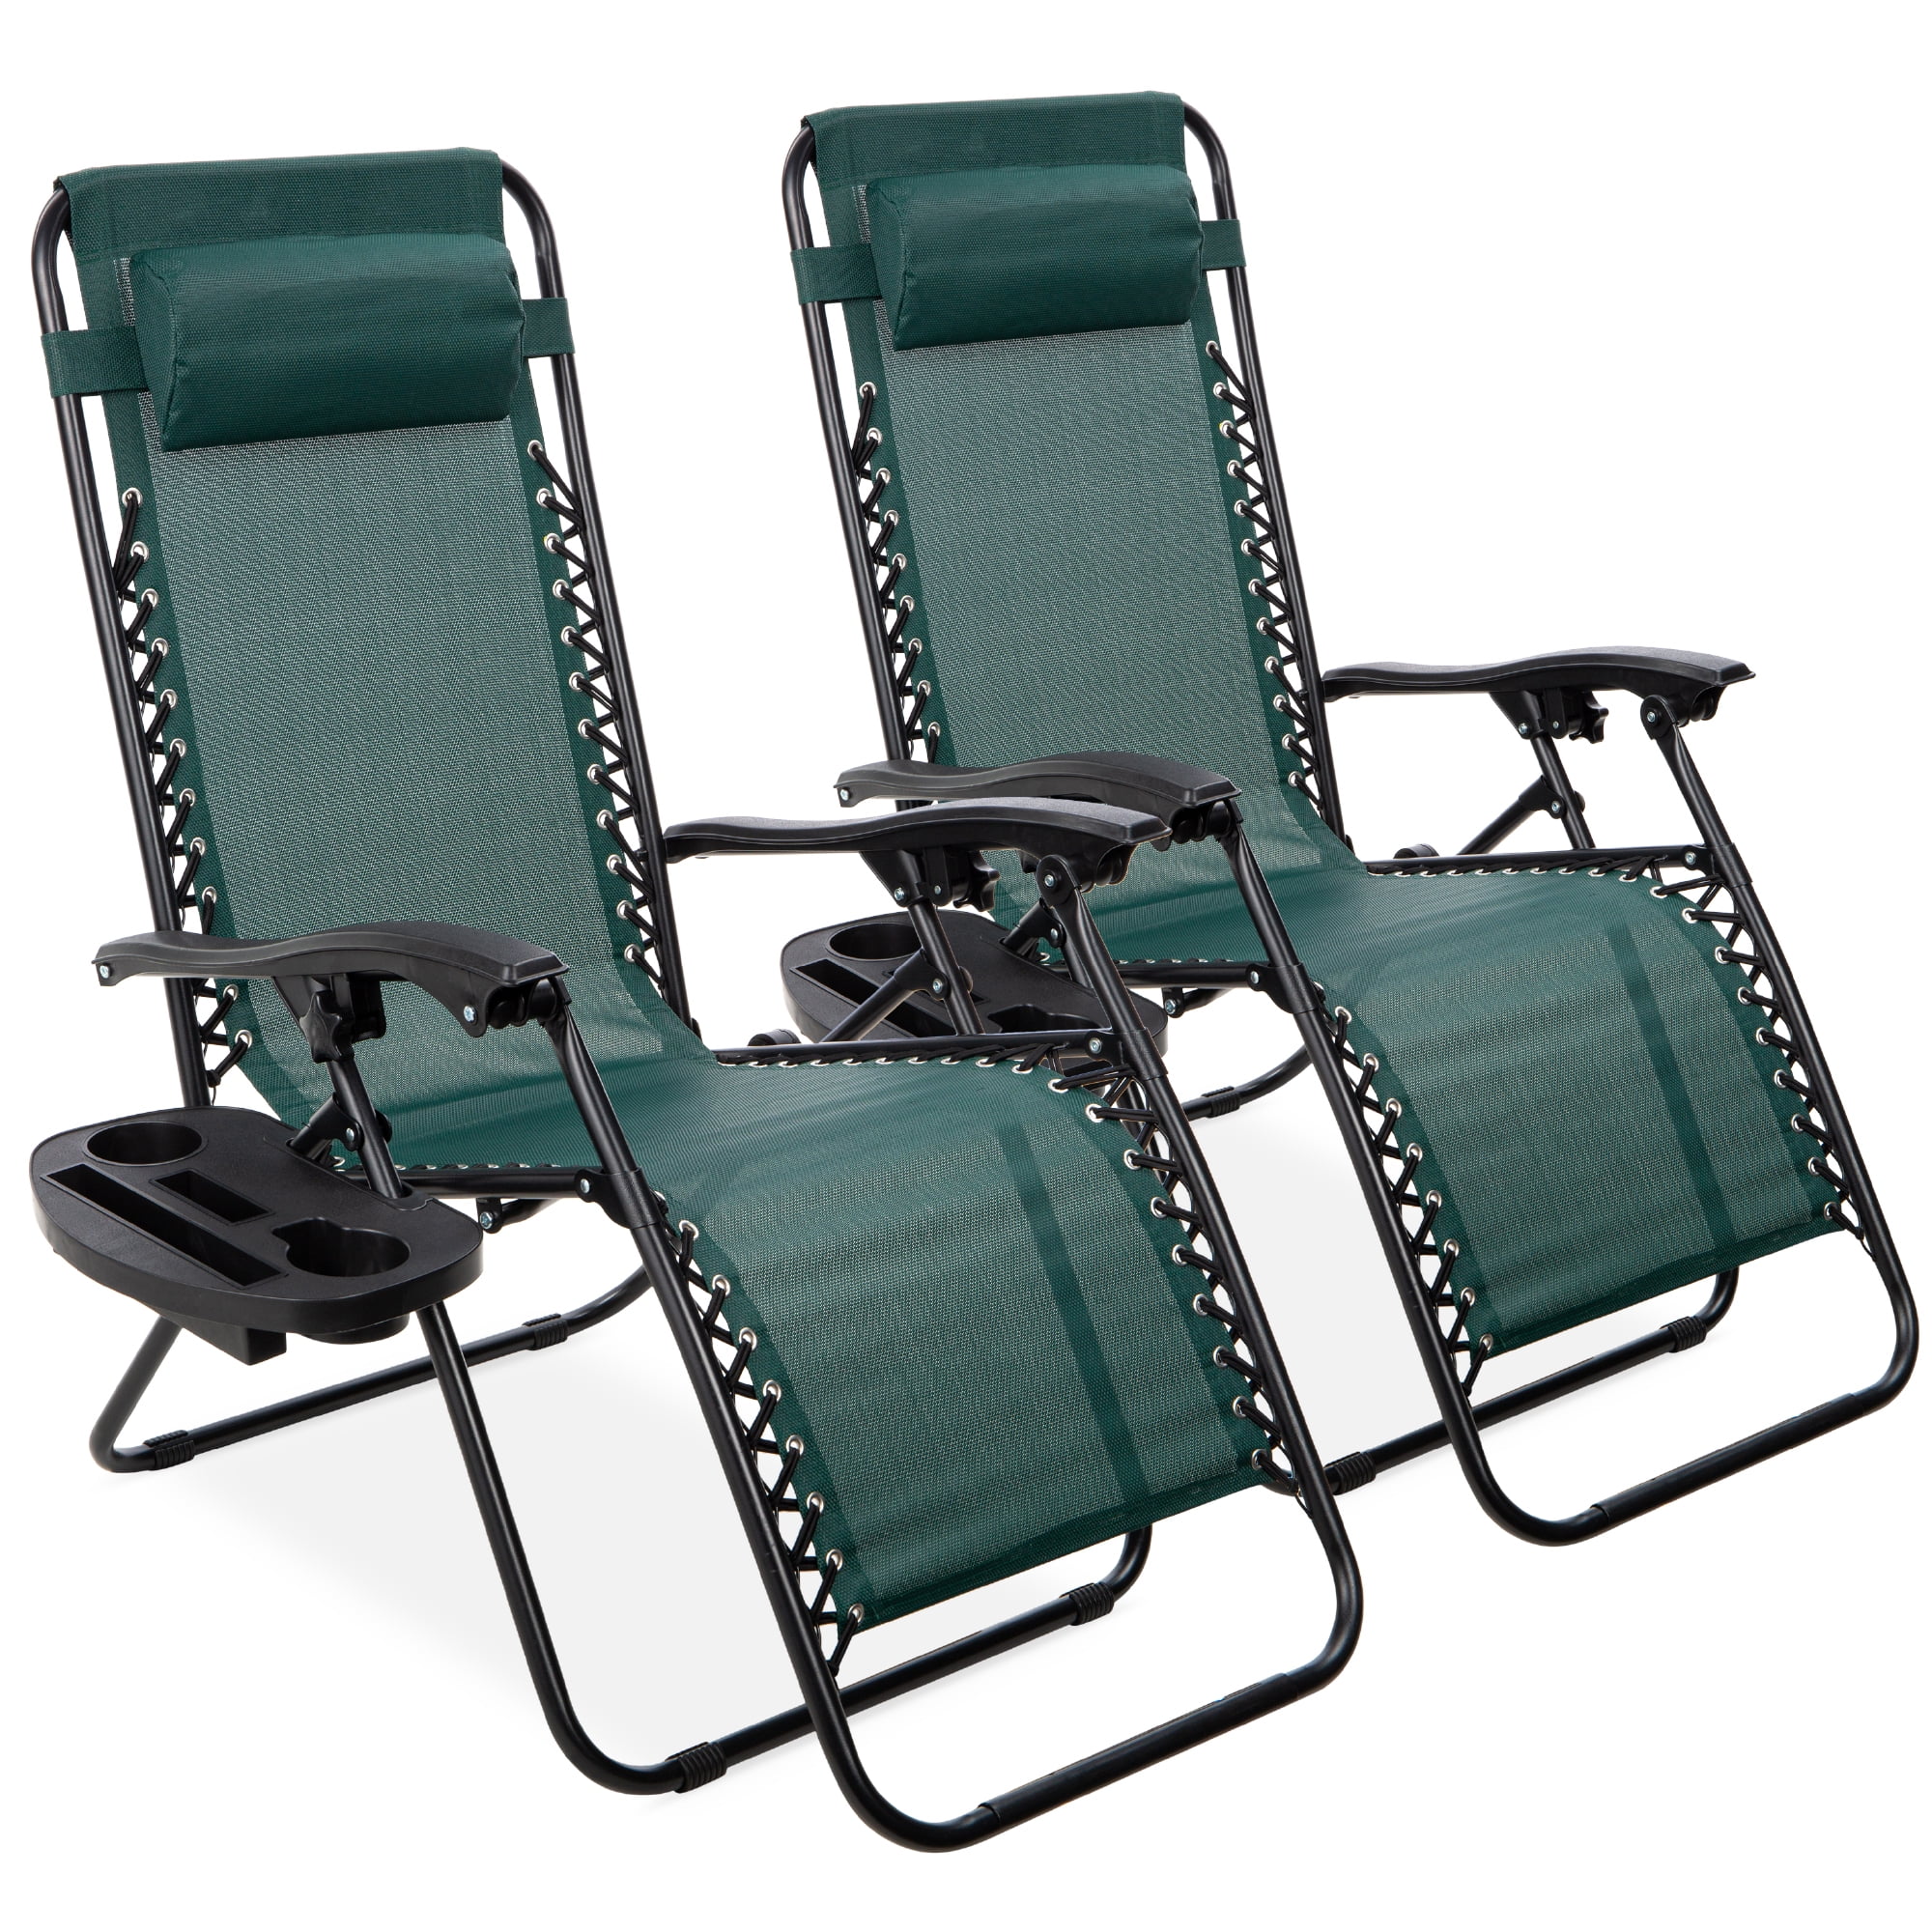 Best Choice Products Set of 2 Zero Gravity Lounge Chair Recliners for Patio, Pool w/ Cup Holder Tray - Forest Green